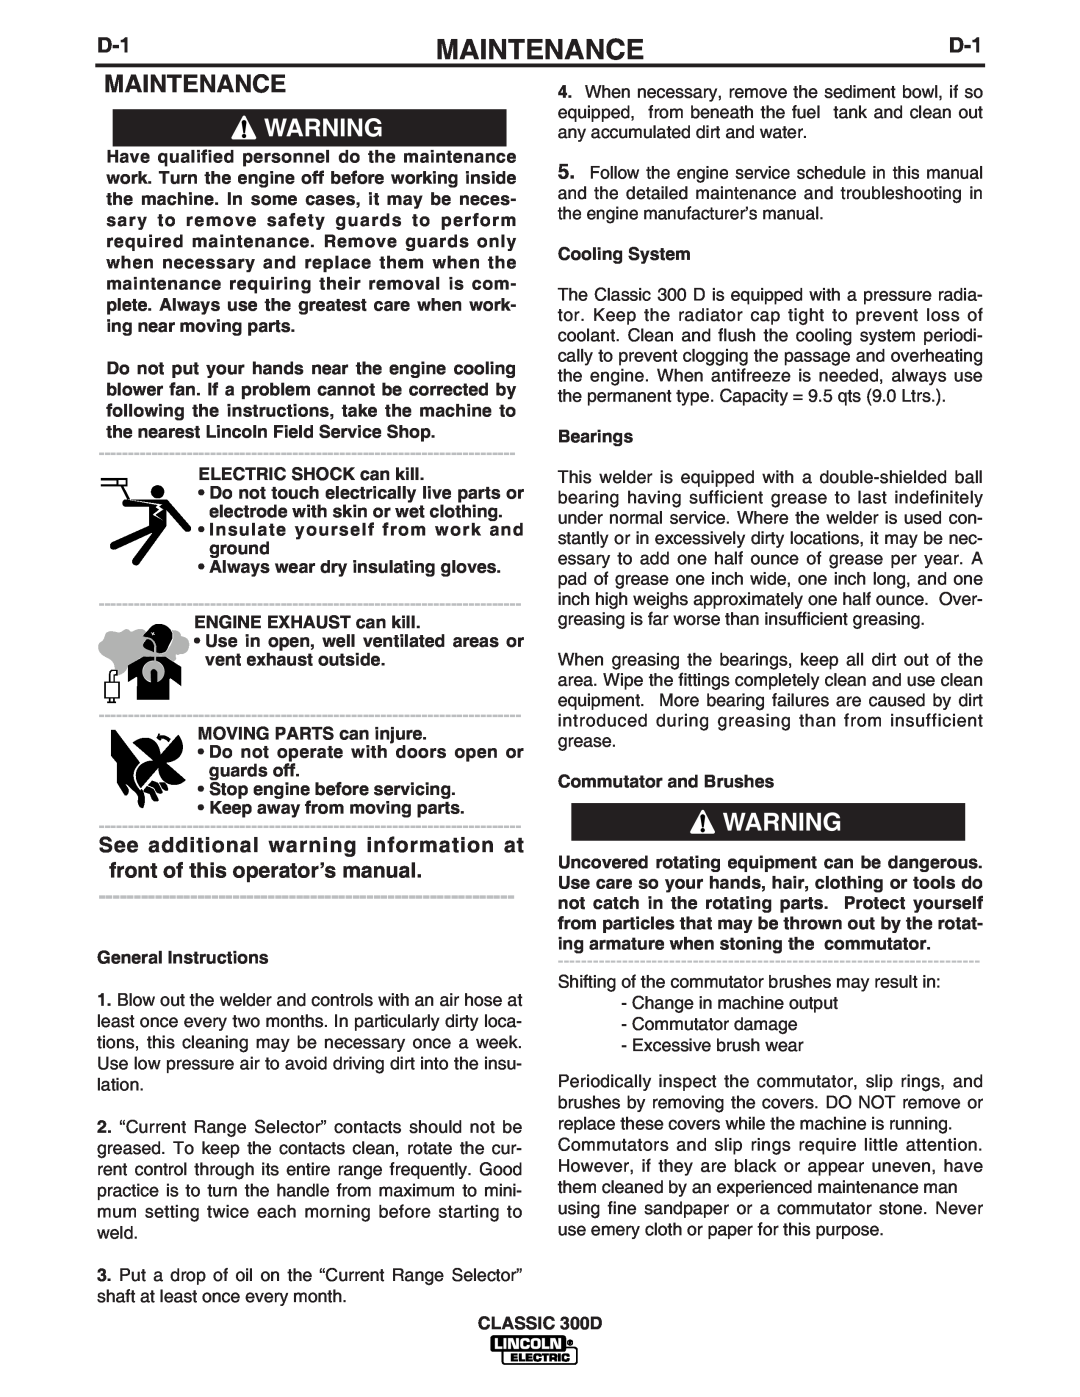 Lincoln Electric 300 D Maintenance, See additional warning information at front of this operator’s manual 